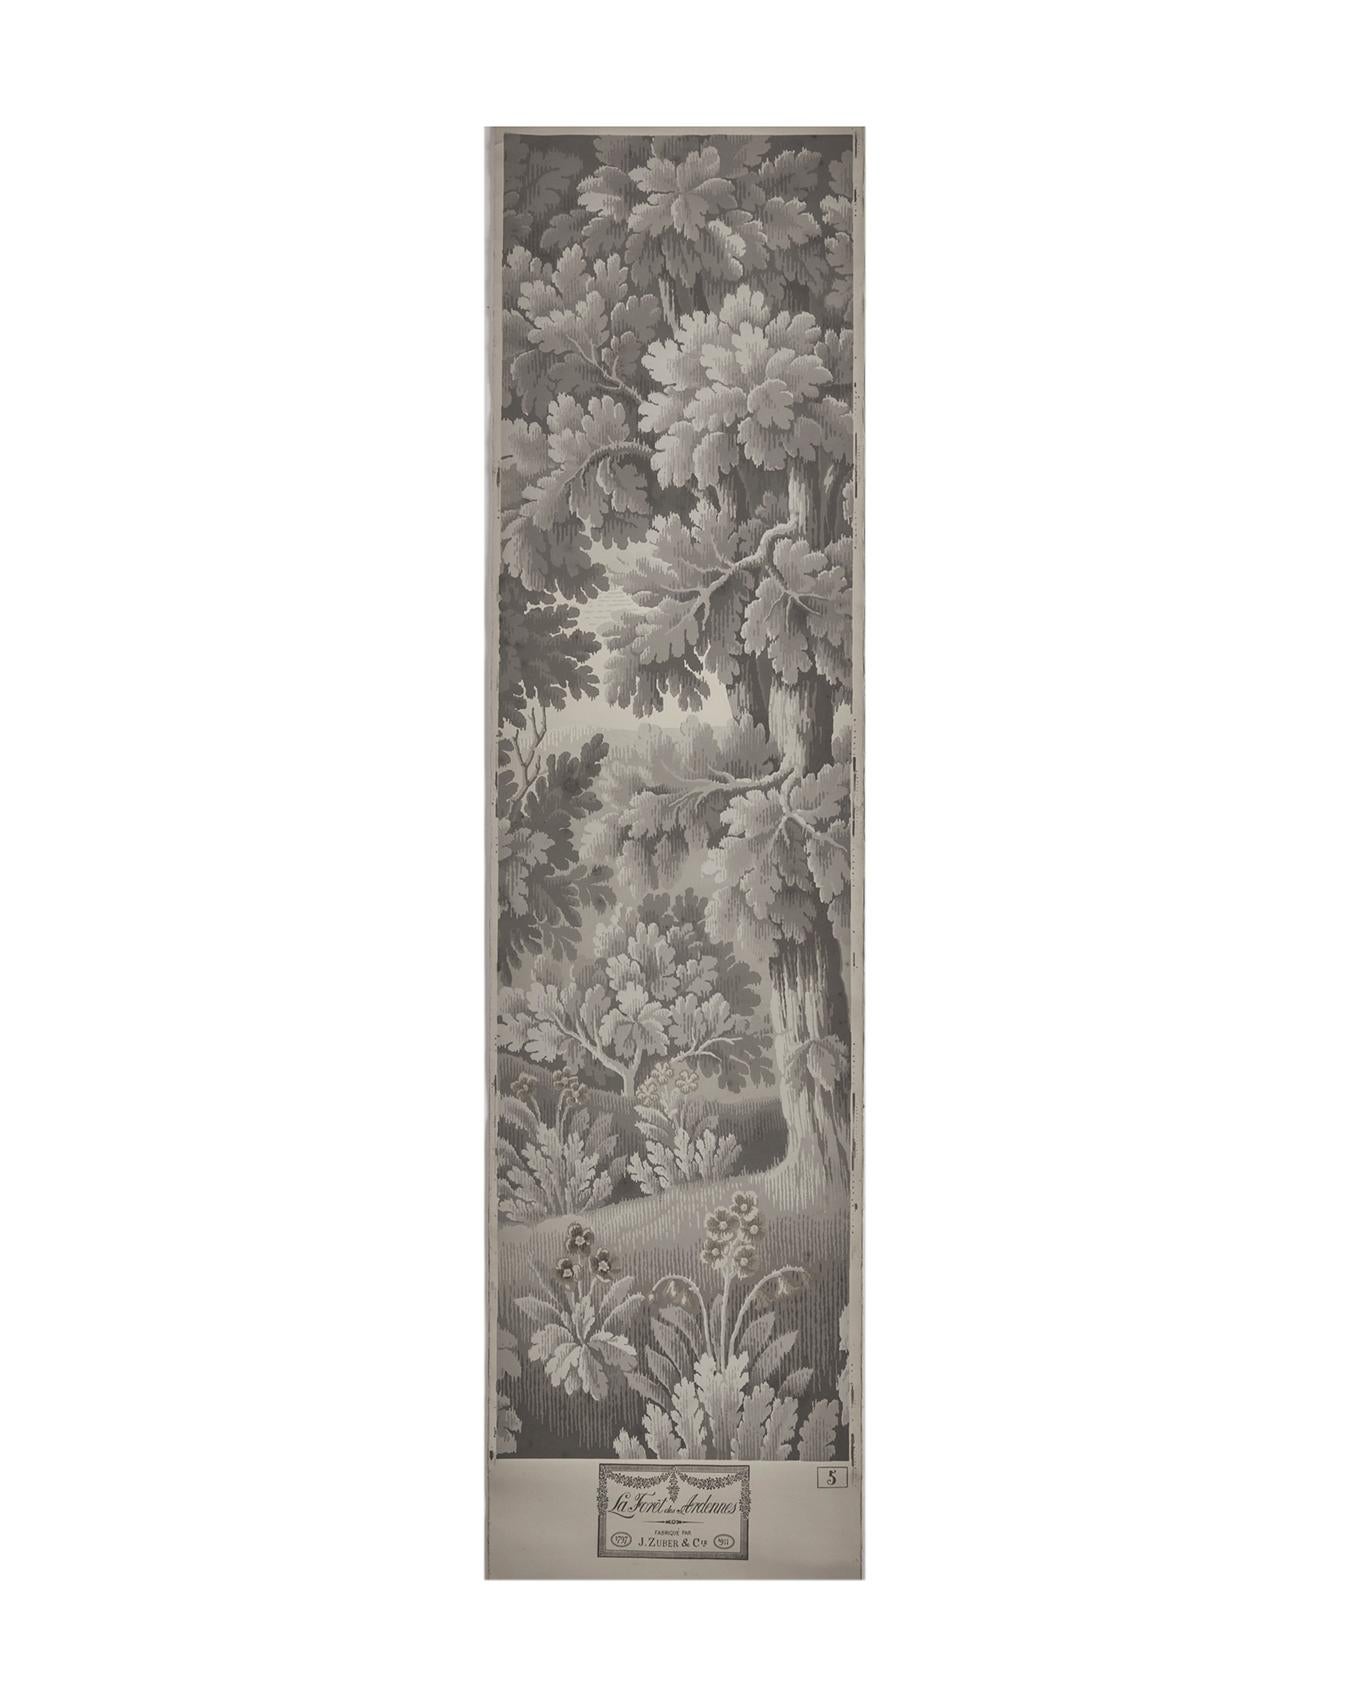 Zuber, 'La Foret des Ardennes' Hand Wood Blocked Scenic Wall Paper For Sale 1